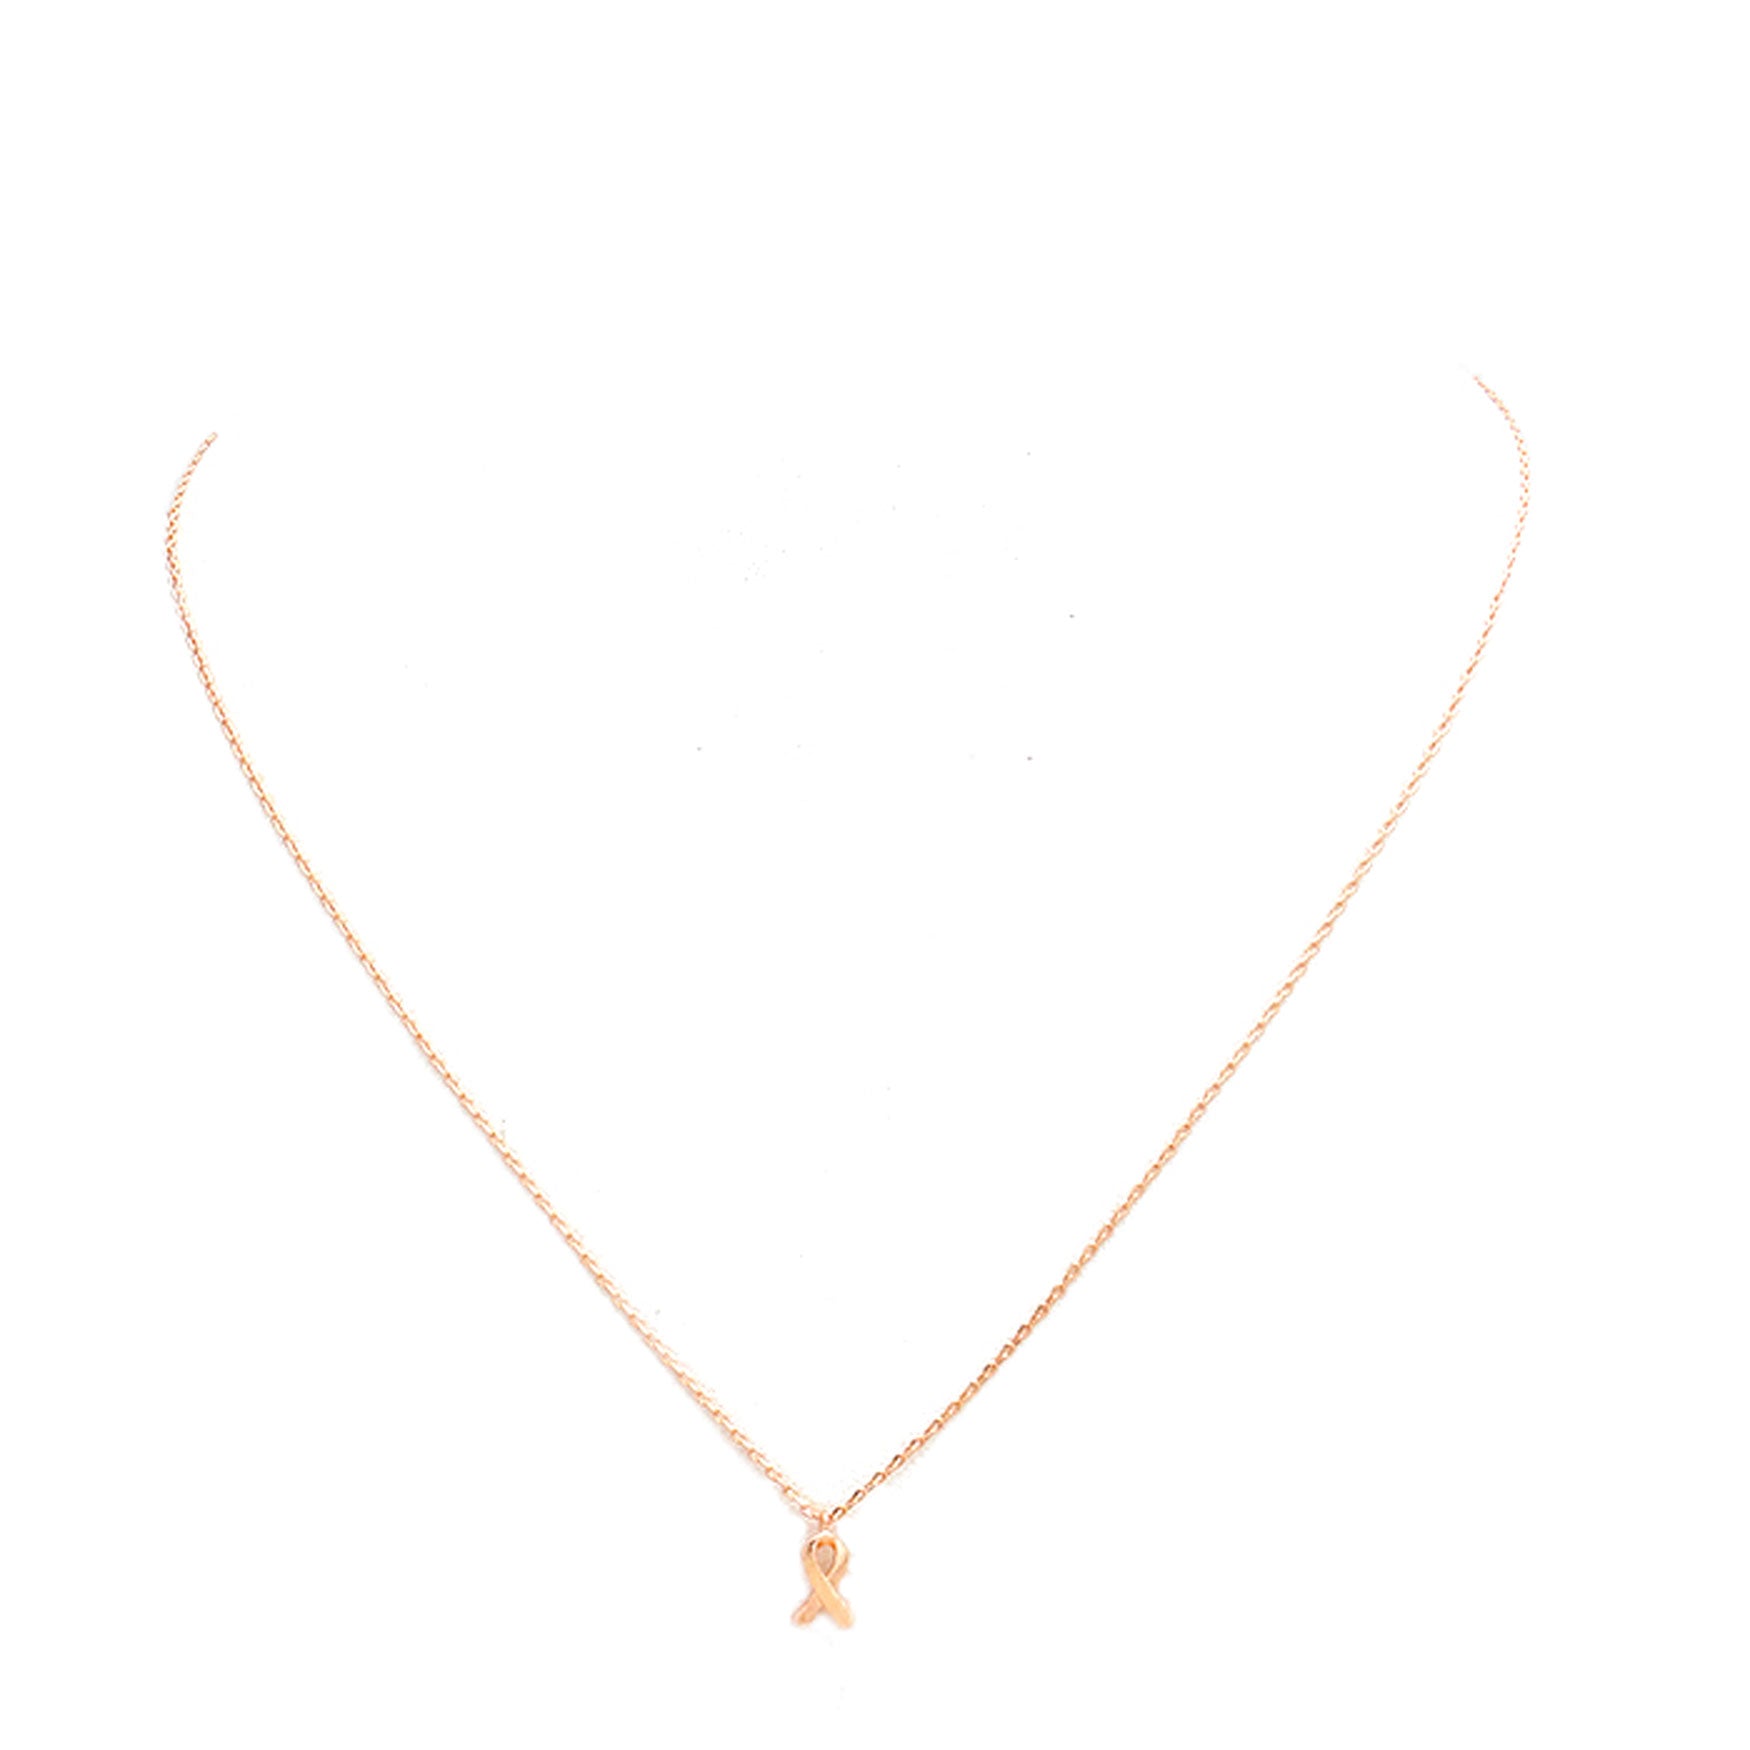 Rose Gold Textured Matte Metal Pink Ribbon Pendant Necklace. Beautifully crafted design adds a gorgeous glow to any outfit. Jewelry that fits your lifestyle! Perfect Birthday Gift, Anniversary Gift, Mother's Day Gift, Anniversary Gift, Graduation Gift, Prom Jewelry, Just Because Gift, Thank you Gift.